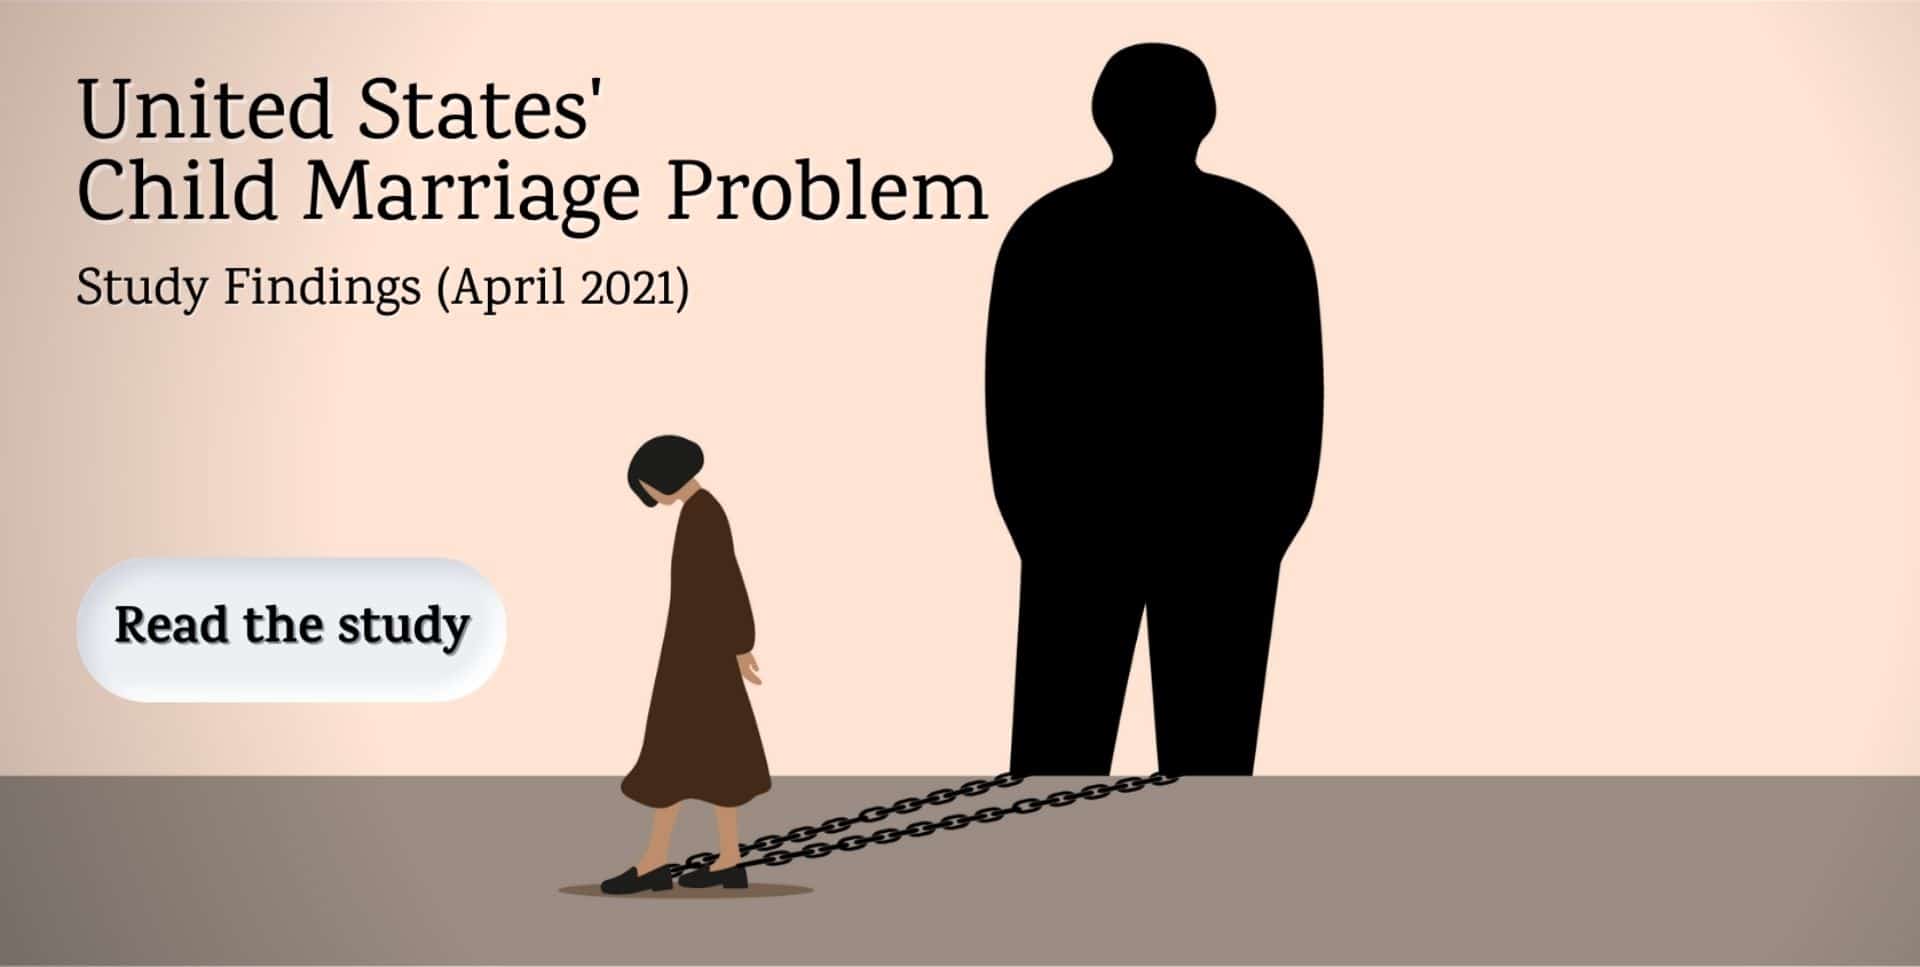 United States Child Marriage Problem Study Findings (April 2021)